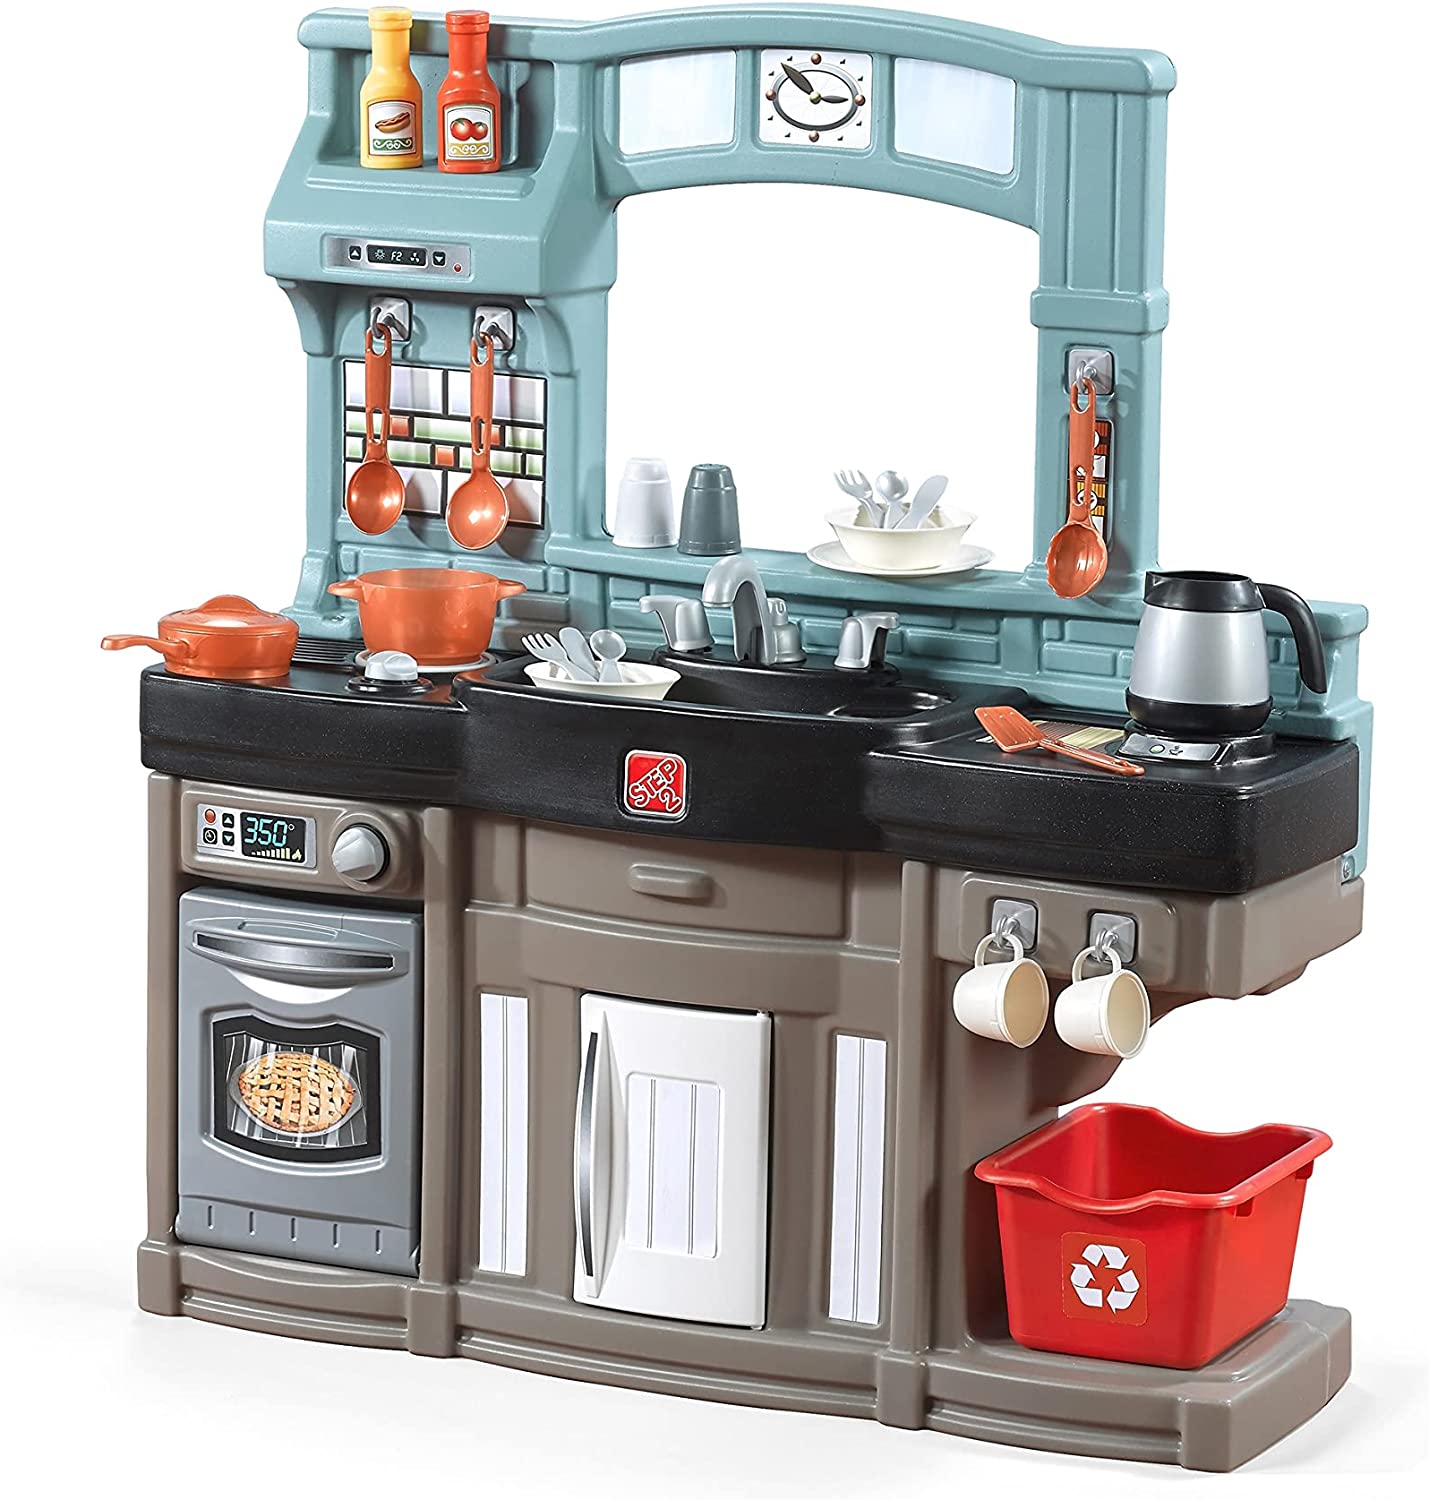 step2 chefs set for kids, best toys for 2-year-olds